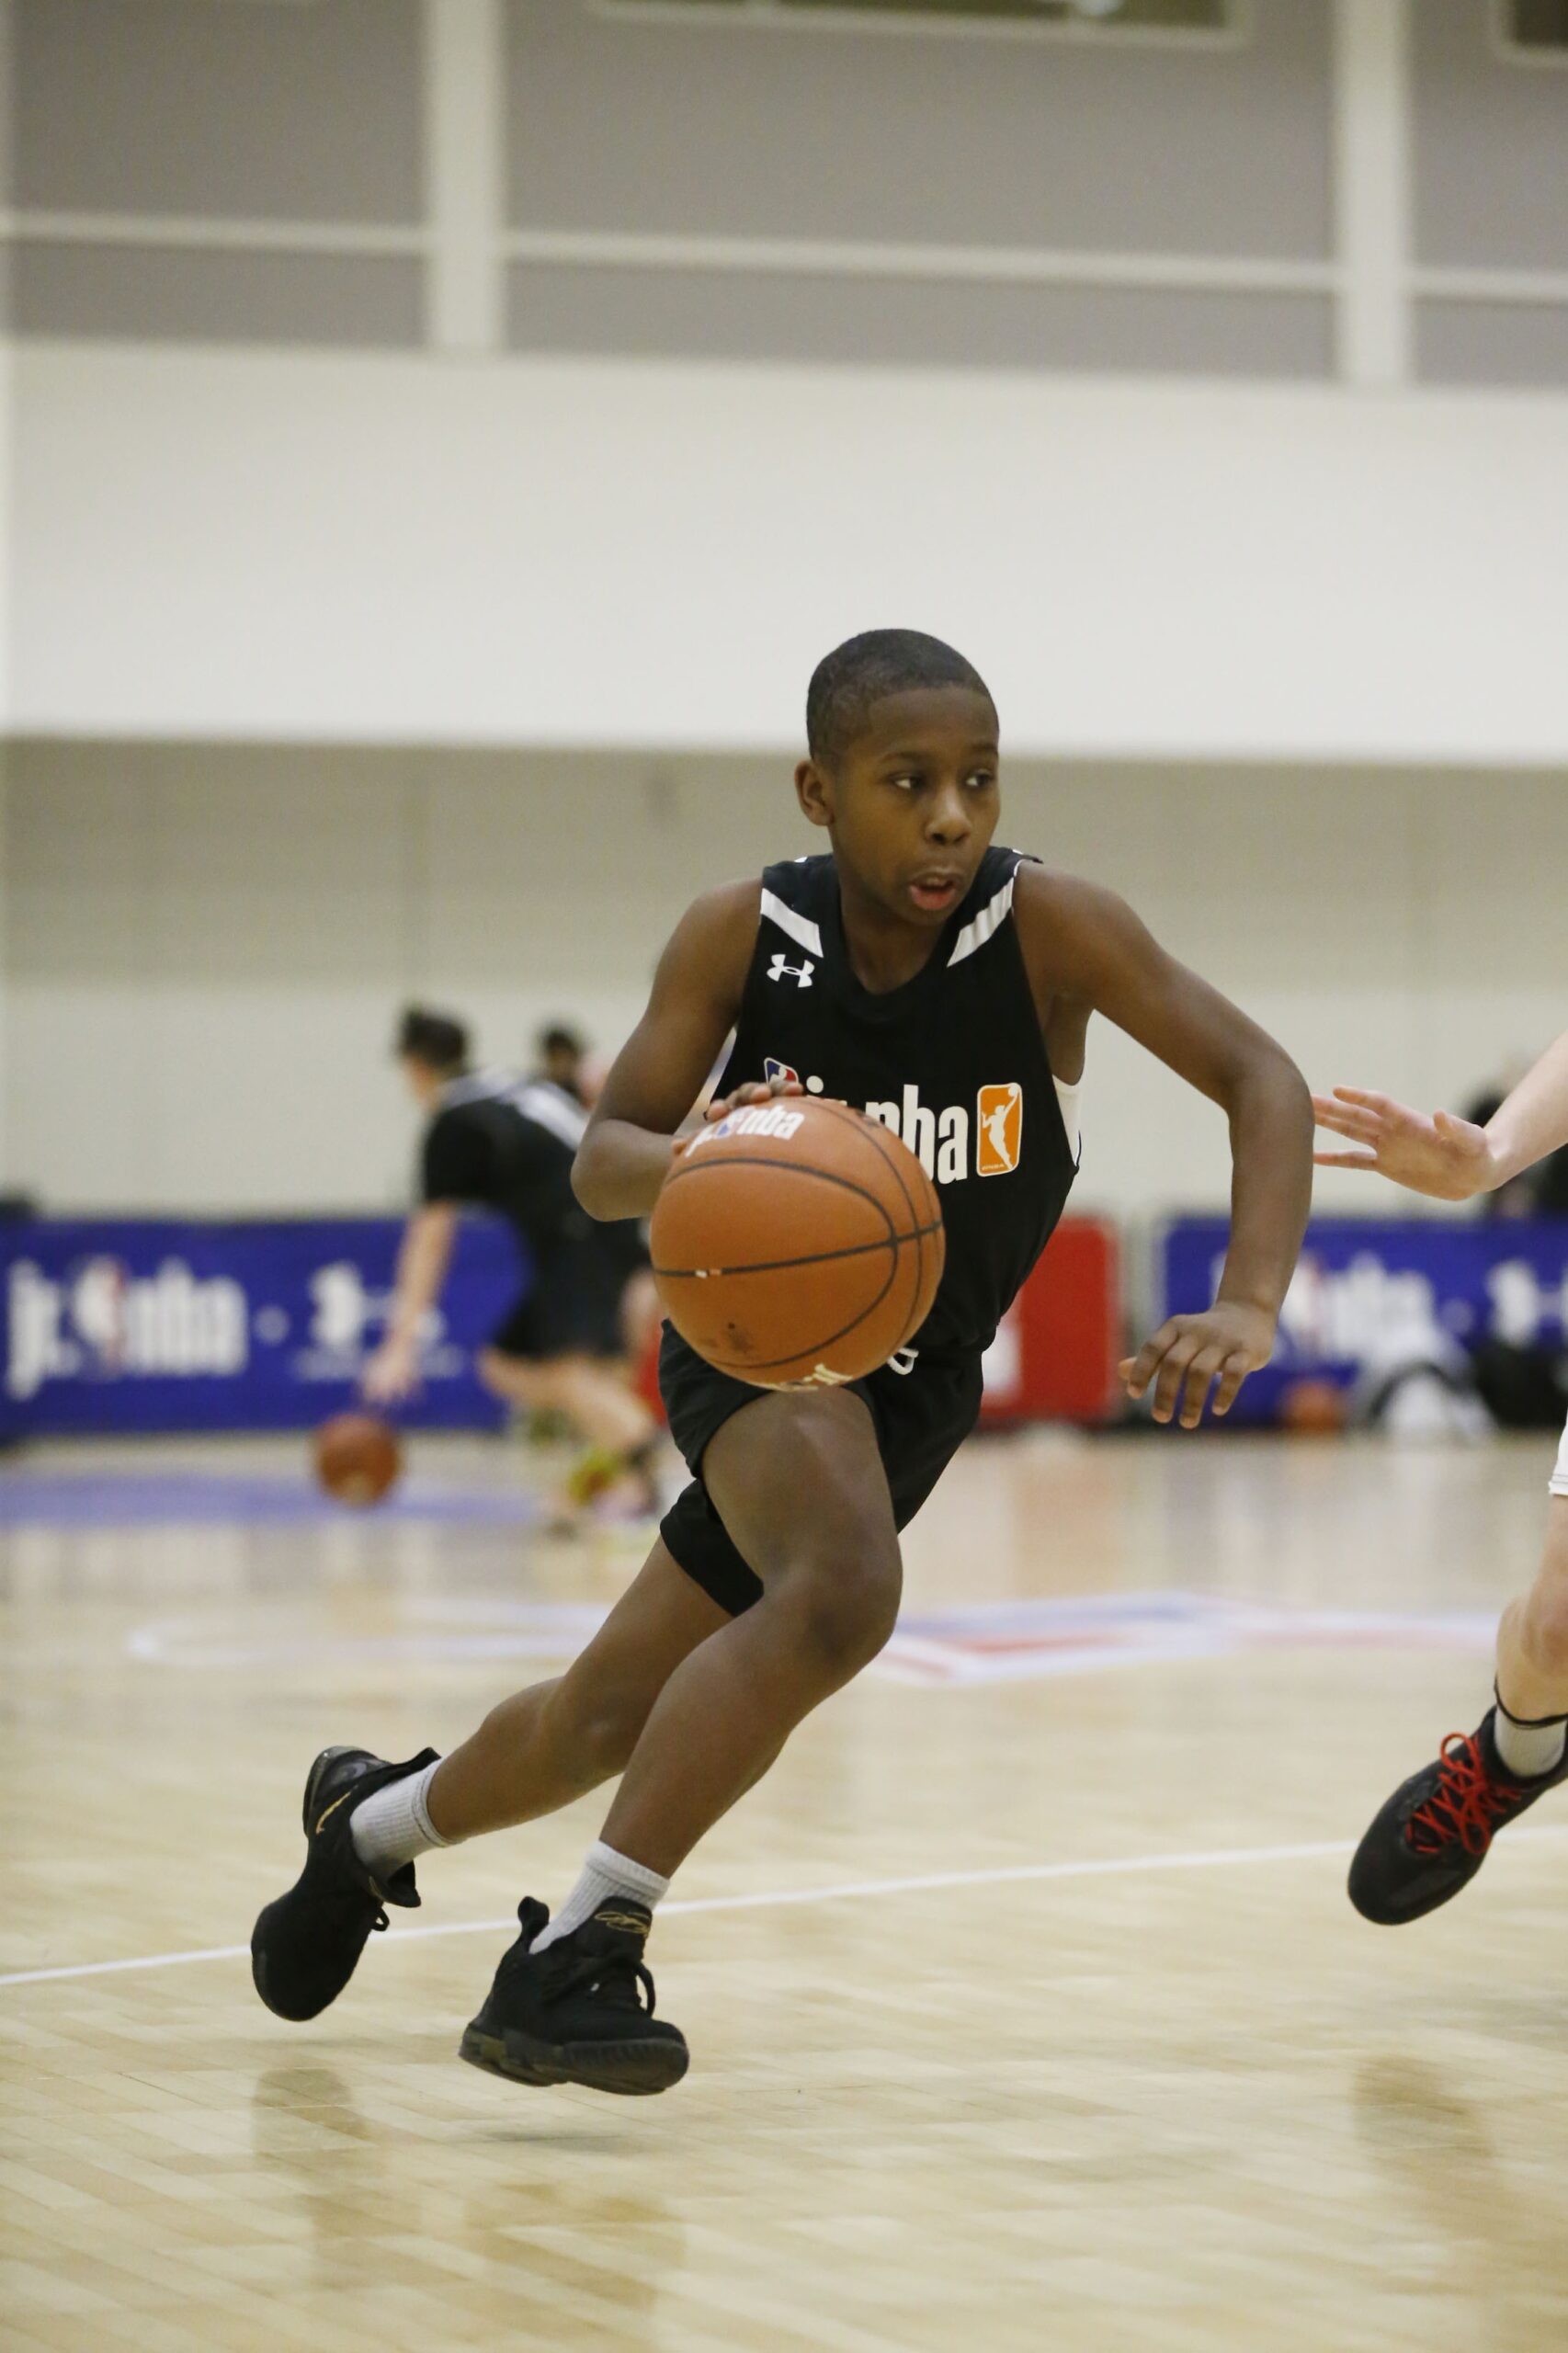 CHICAGO, IL - FEBRUARY 16: during the 2020 Jr. NBA 3v3 All-Star Tournament on February 16, 2020 at Navy Pier in Chicago, Illinois. NOTE TO USER: User expressly acknowledges and agrees that, by downloading and or using this photograph, User is consenting to the terms and conditions of the Getty Images License Agreement. Mandatory Copyright Notice: Copyright 2020 NBAE (Photo by Kevin Tanaka/NBAE via Getty Images)